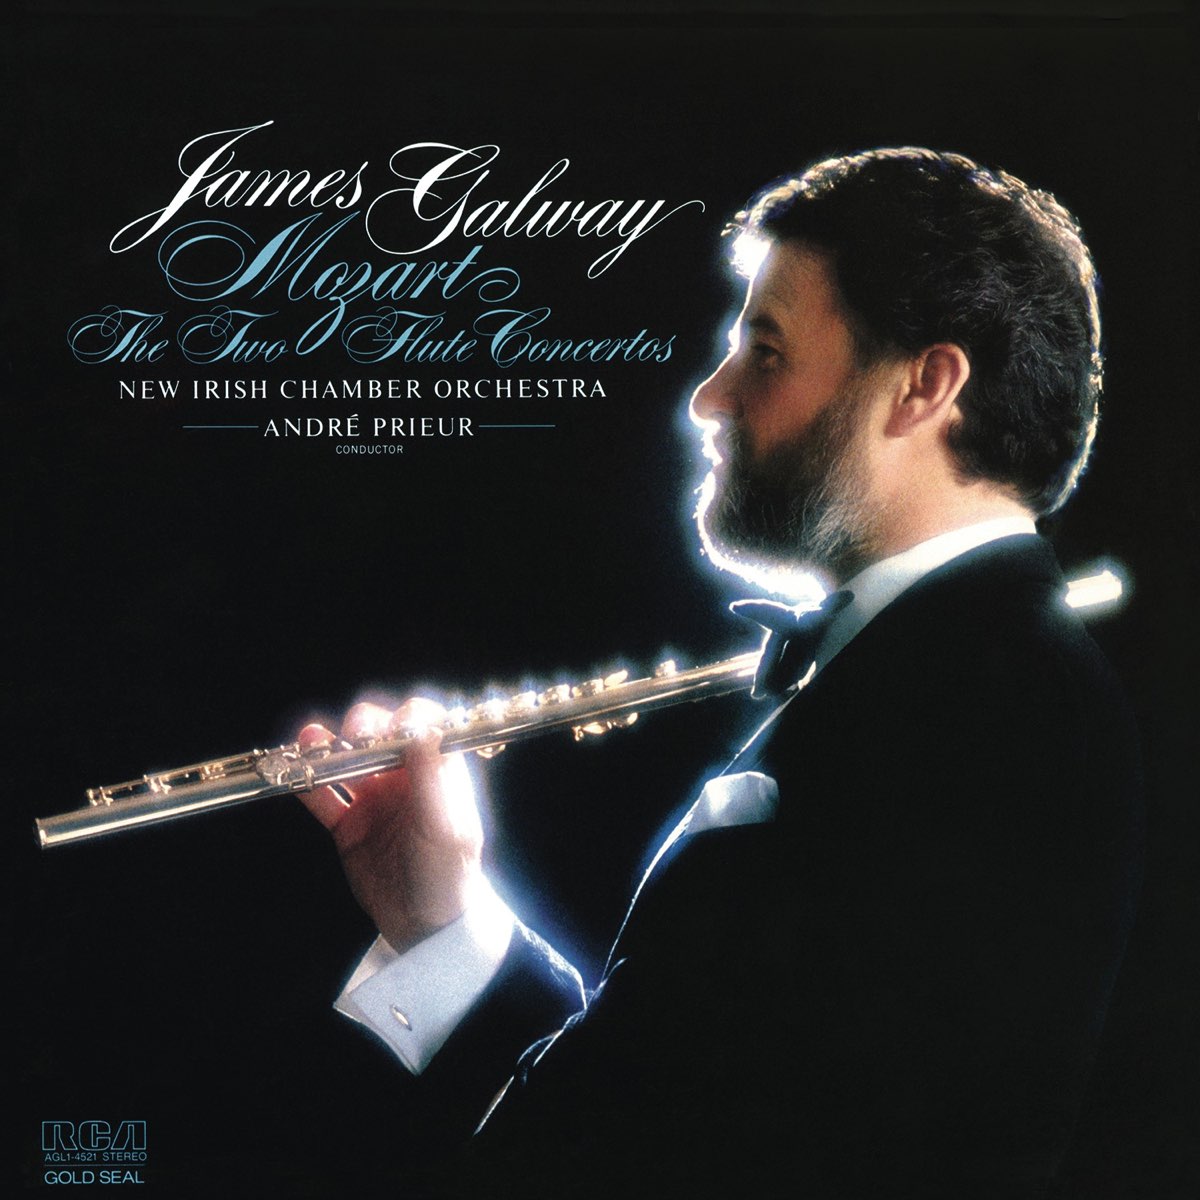 James Galway. James Galway - the Concerto collection (1990). James Galway - the Essential Flute of James Galway album Cover.